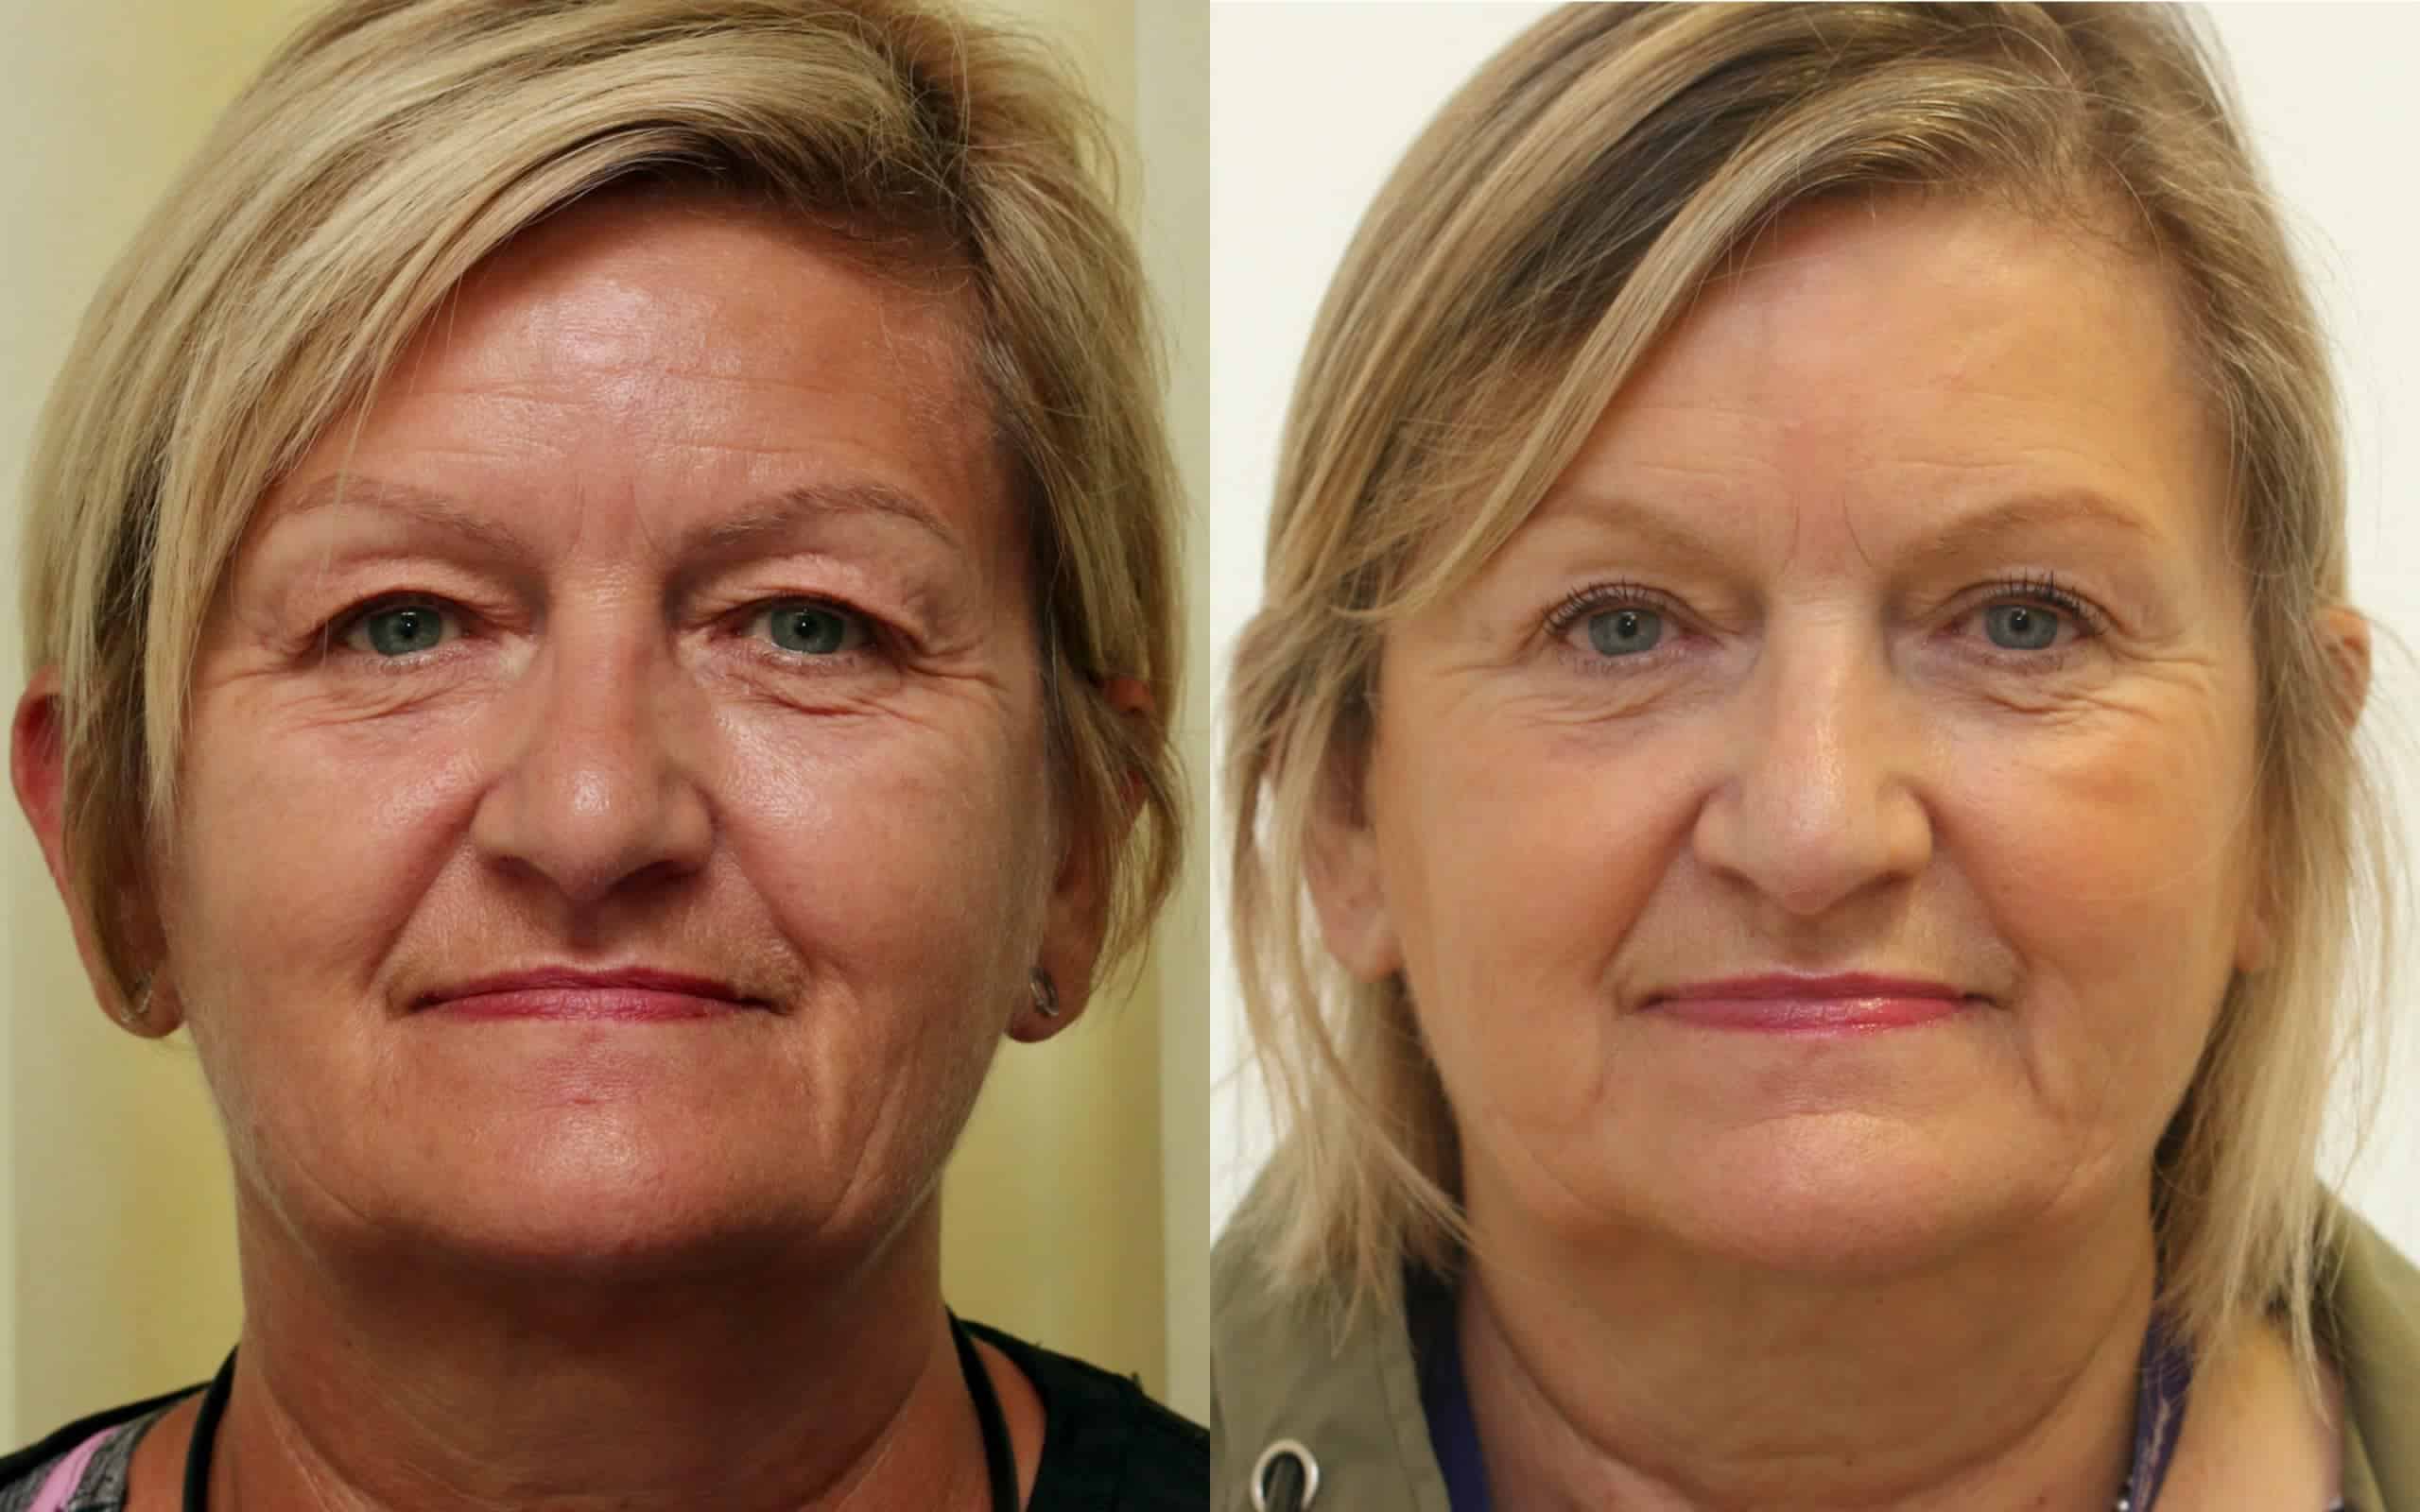 upper eyelid before and after